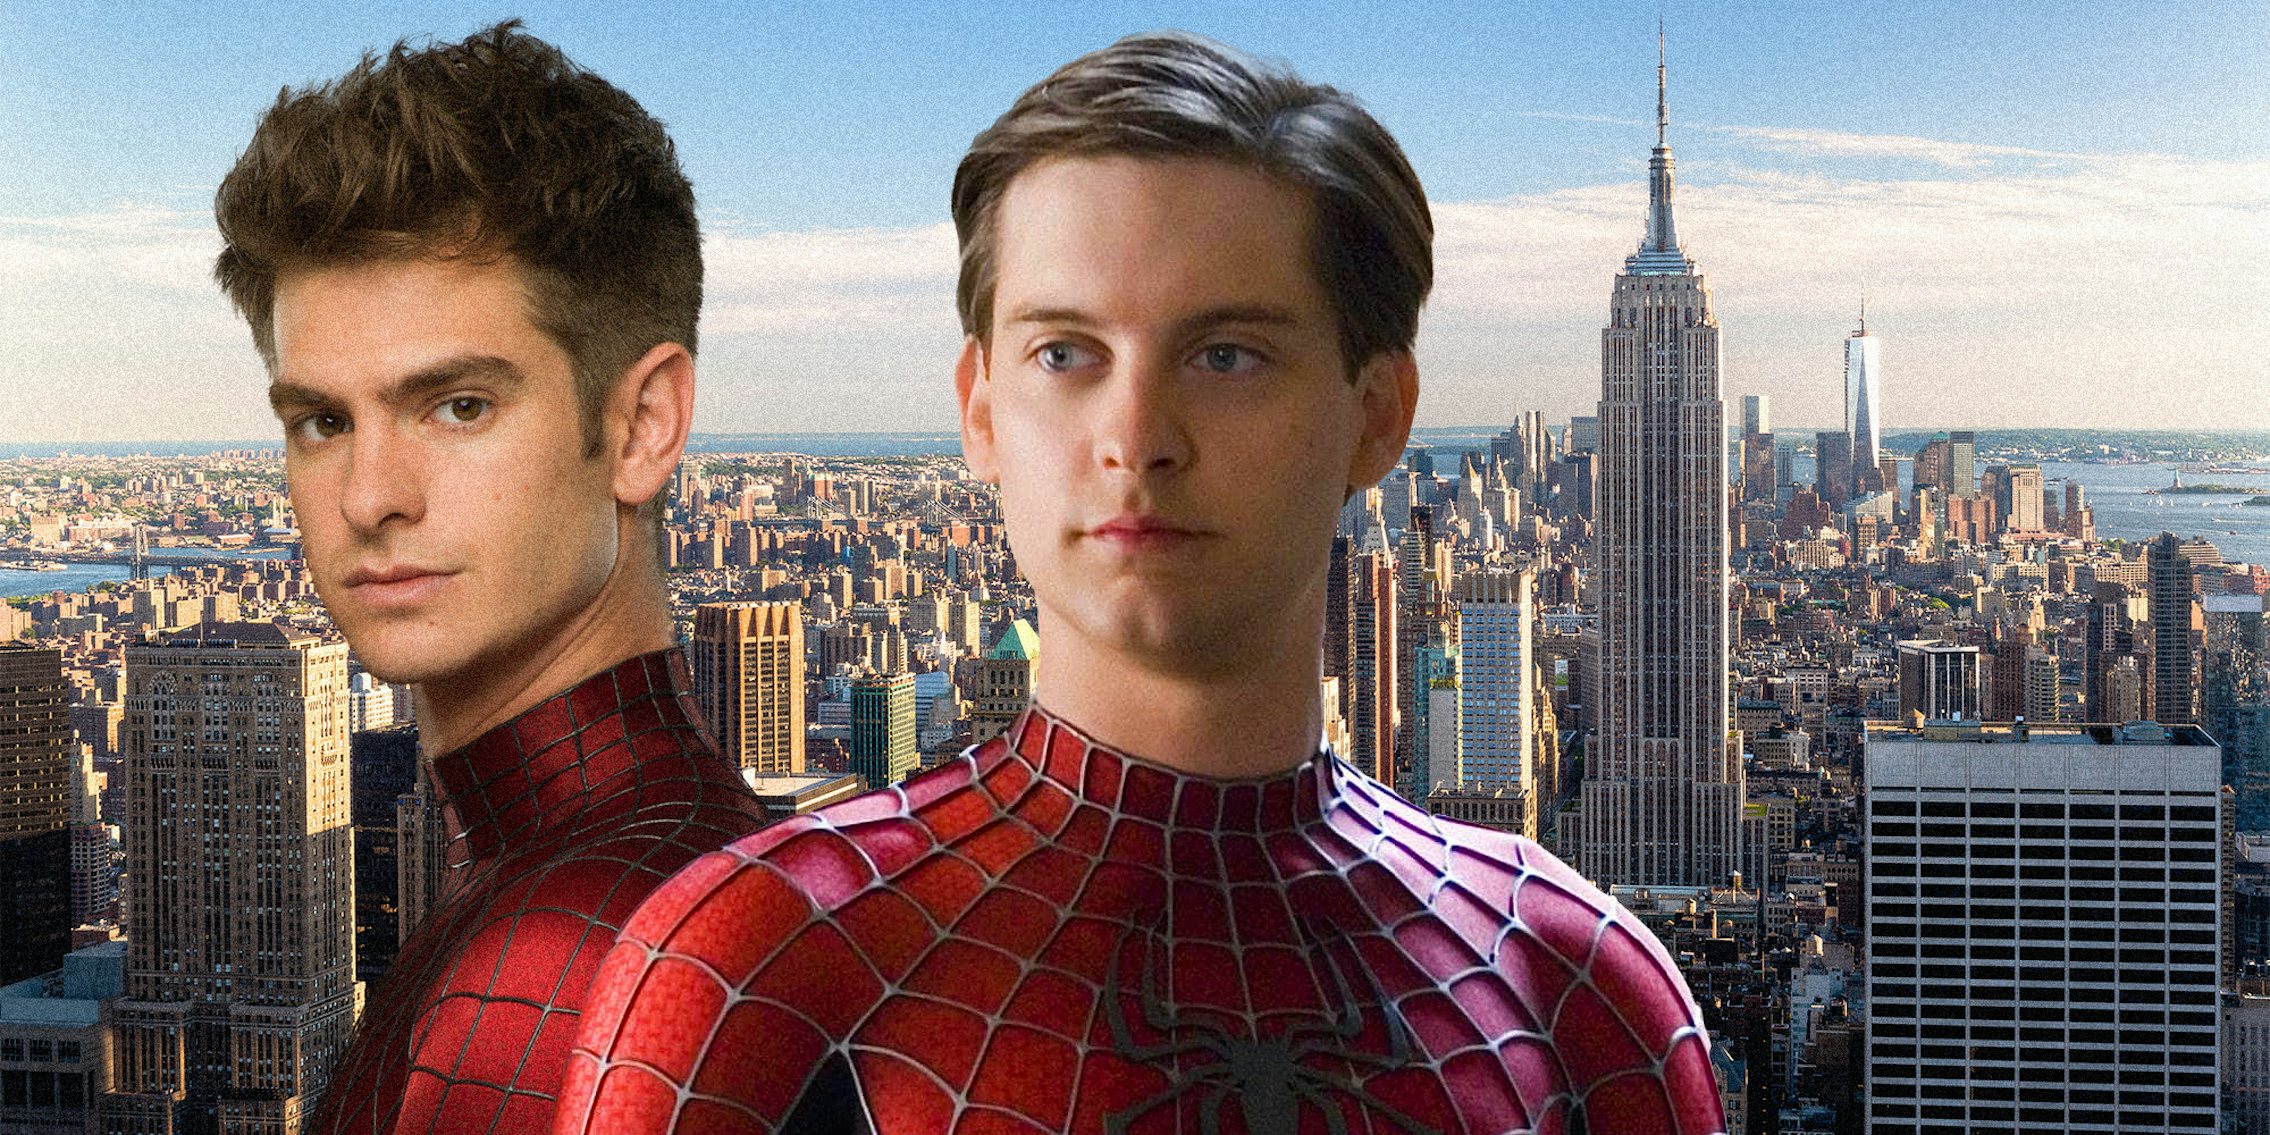 Is Marvel Planning a Live-Action 'Spider-Verse' with Tom Holland?